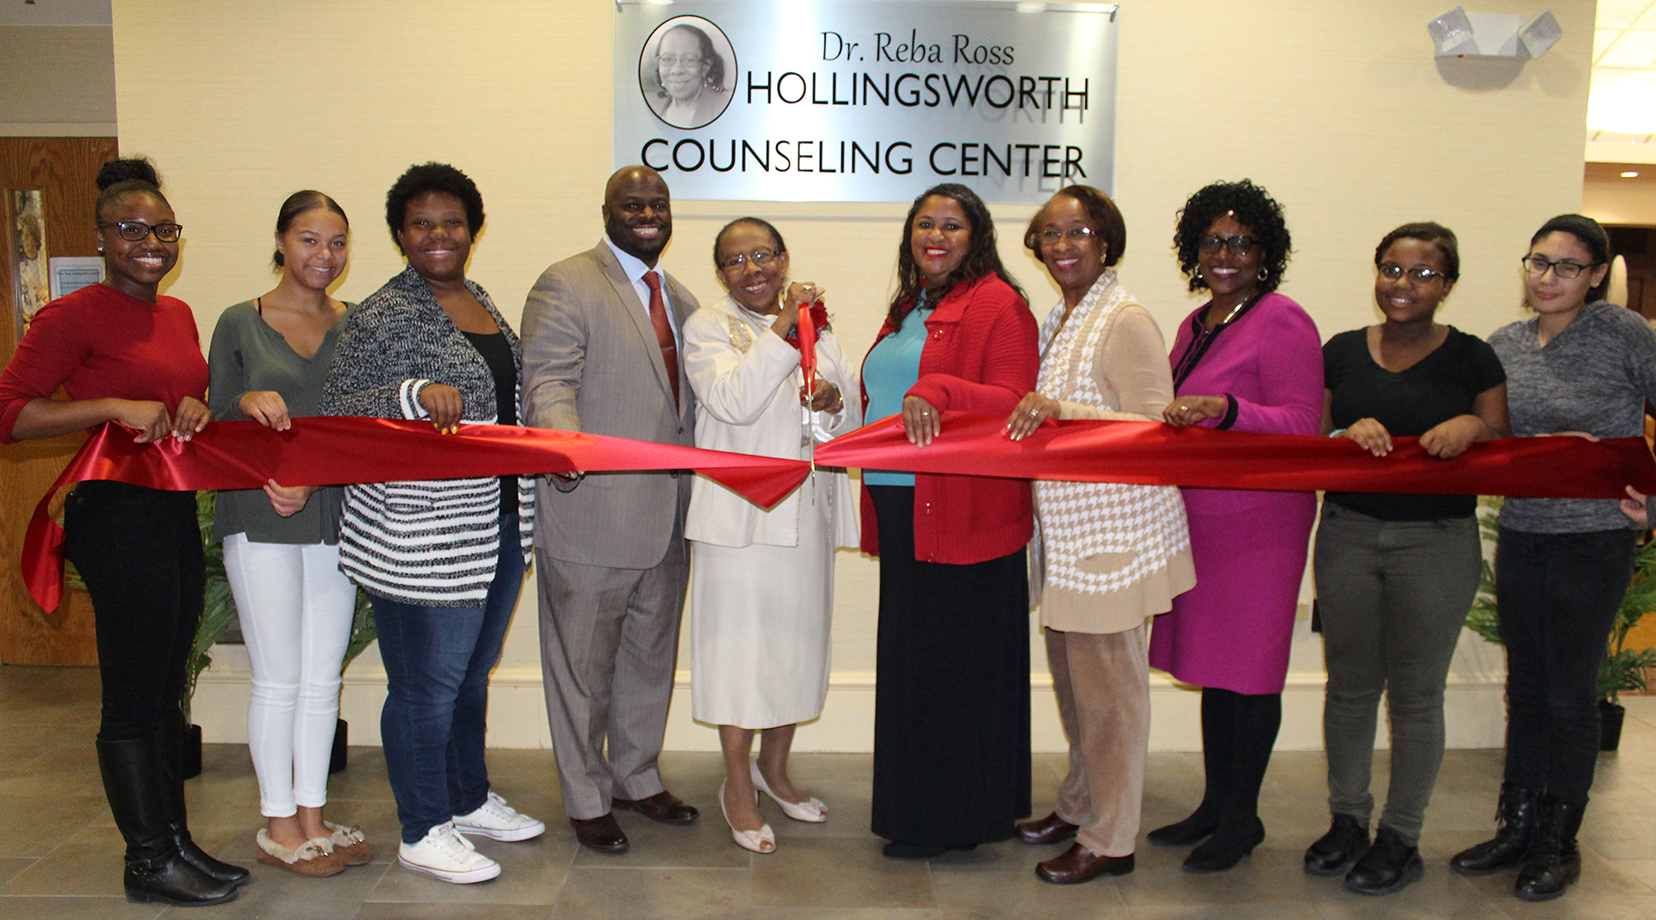 The opening of the Dr. Reba Ross Hollingsworth Counseling Center at the Early College High School at Delaware State University was recently celebrated with a ribbon-cutting ceremony.